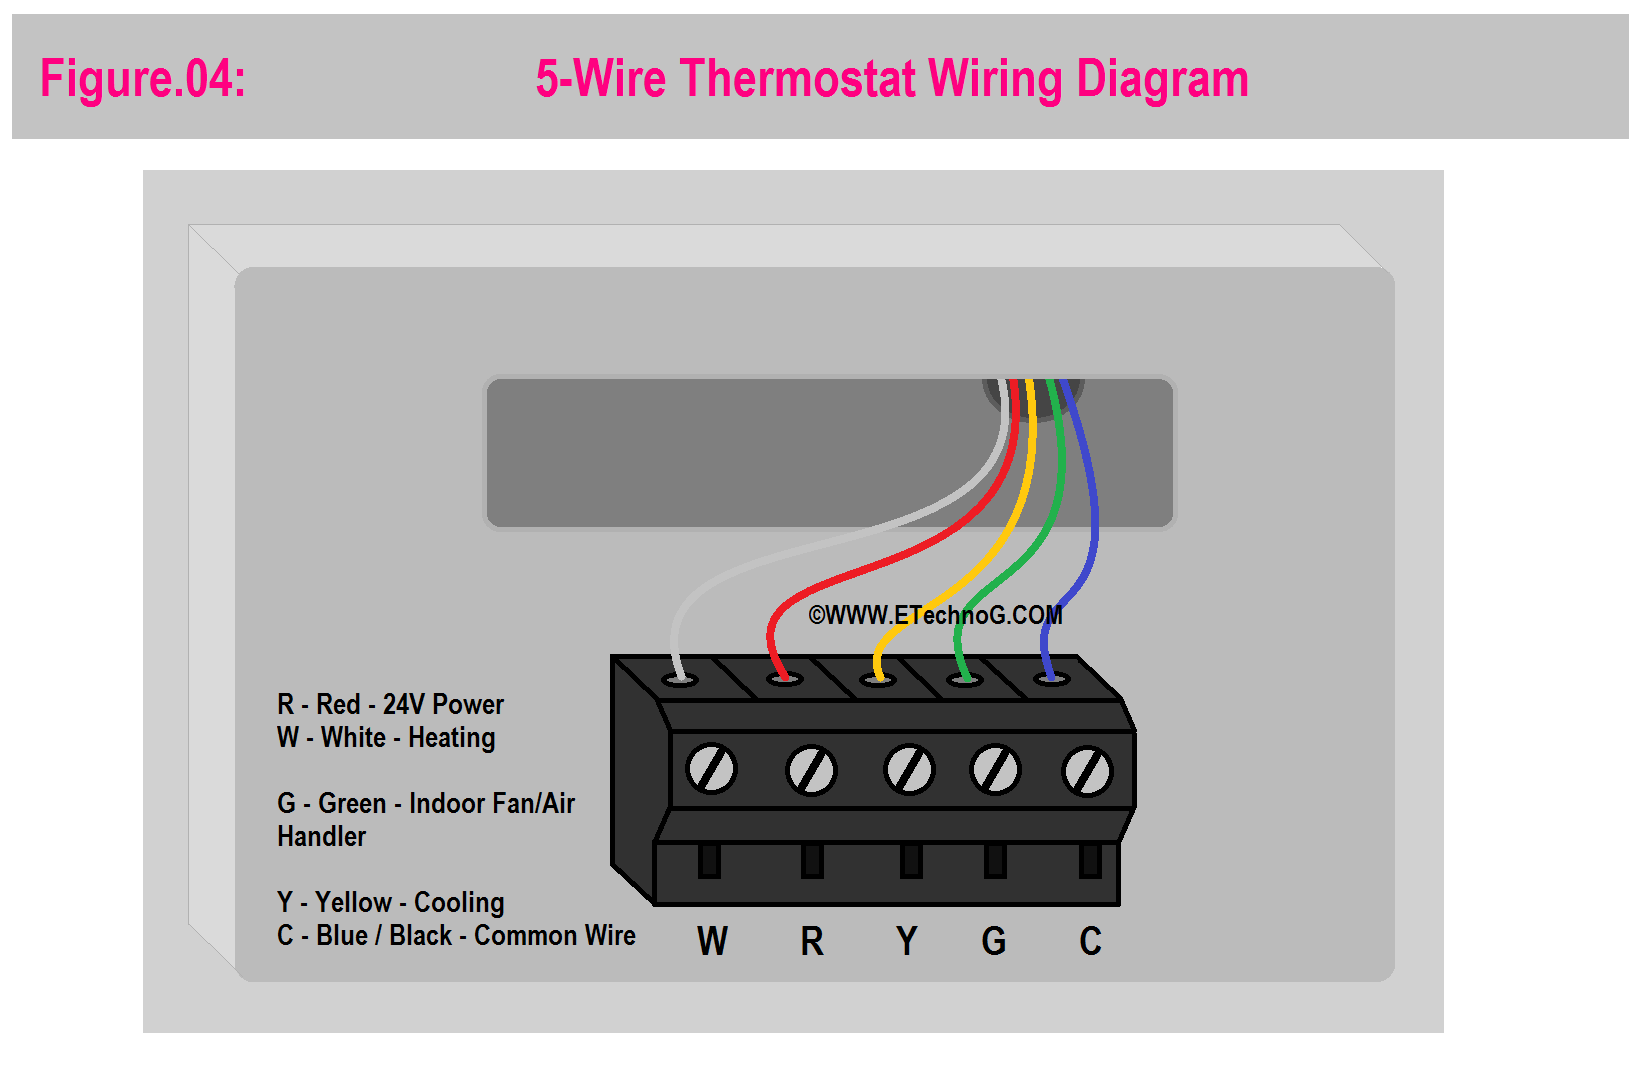 5-Wire Thermostat Wiring Diagram